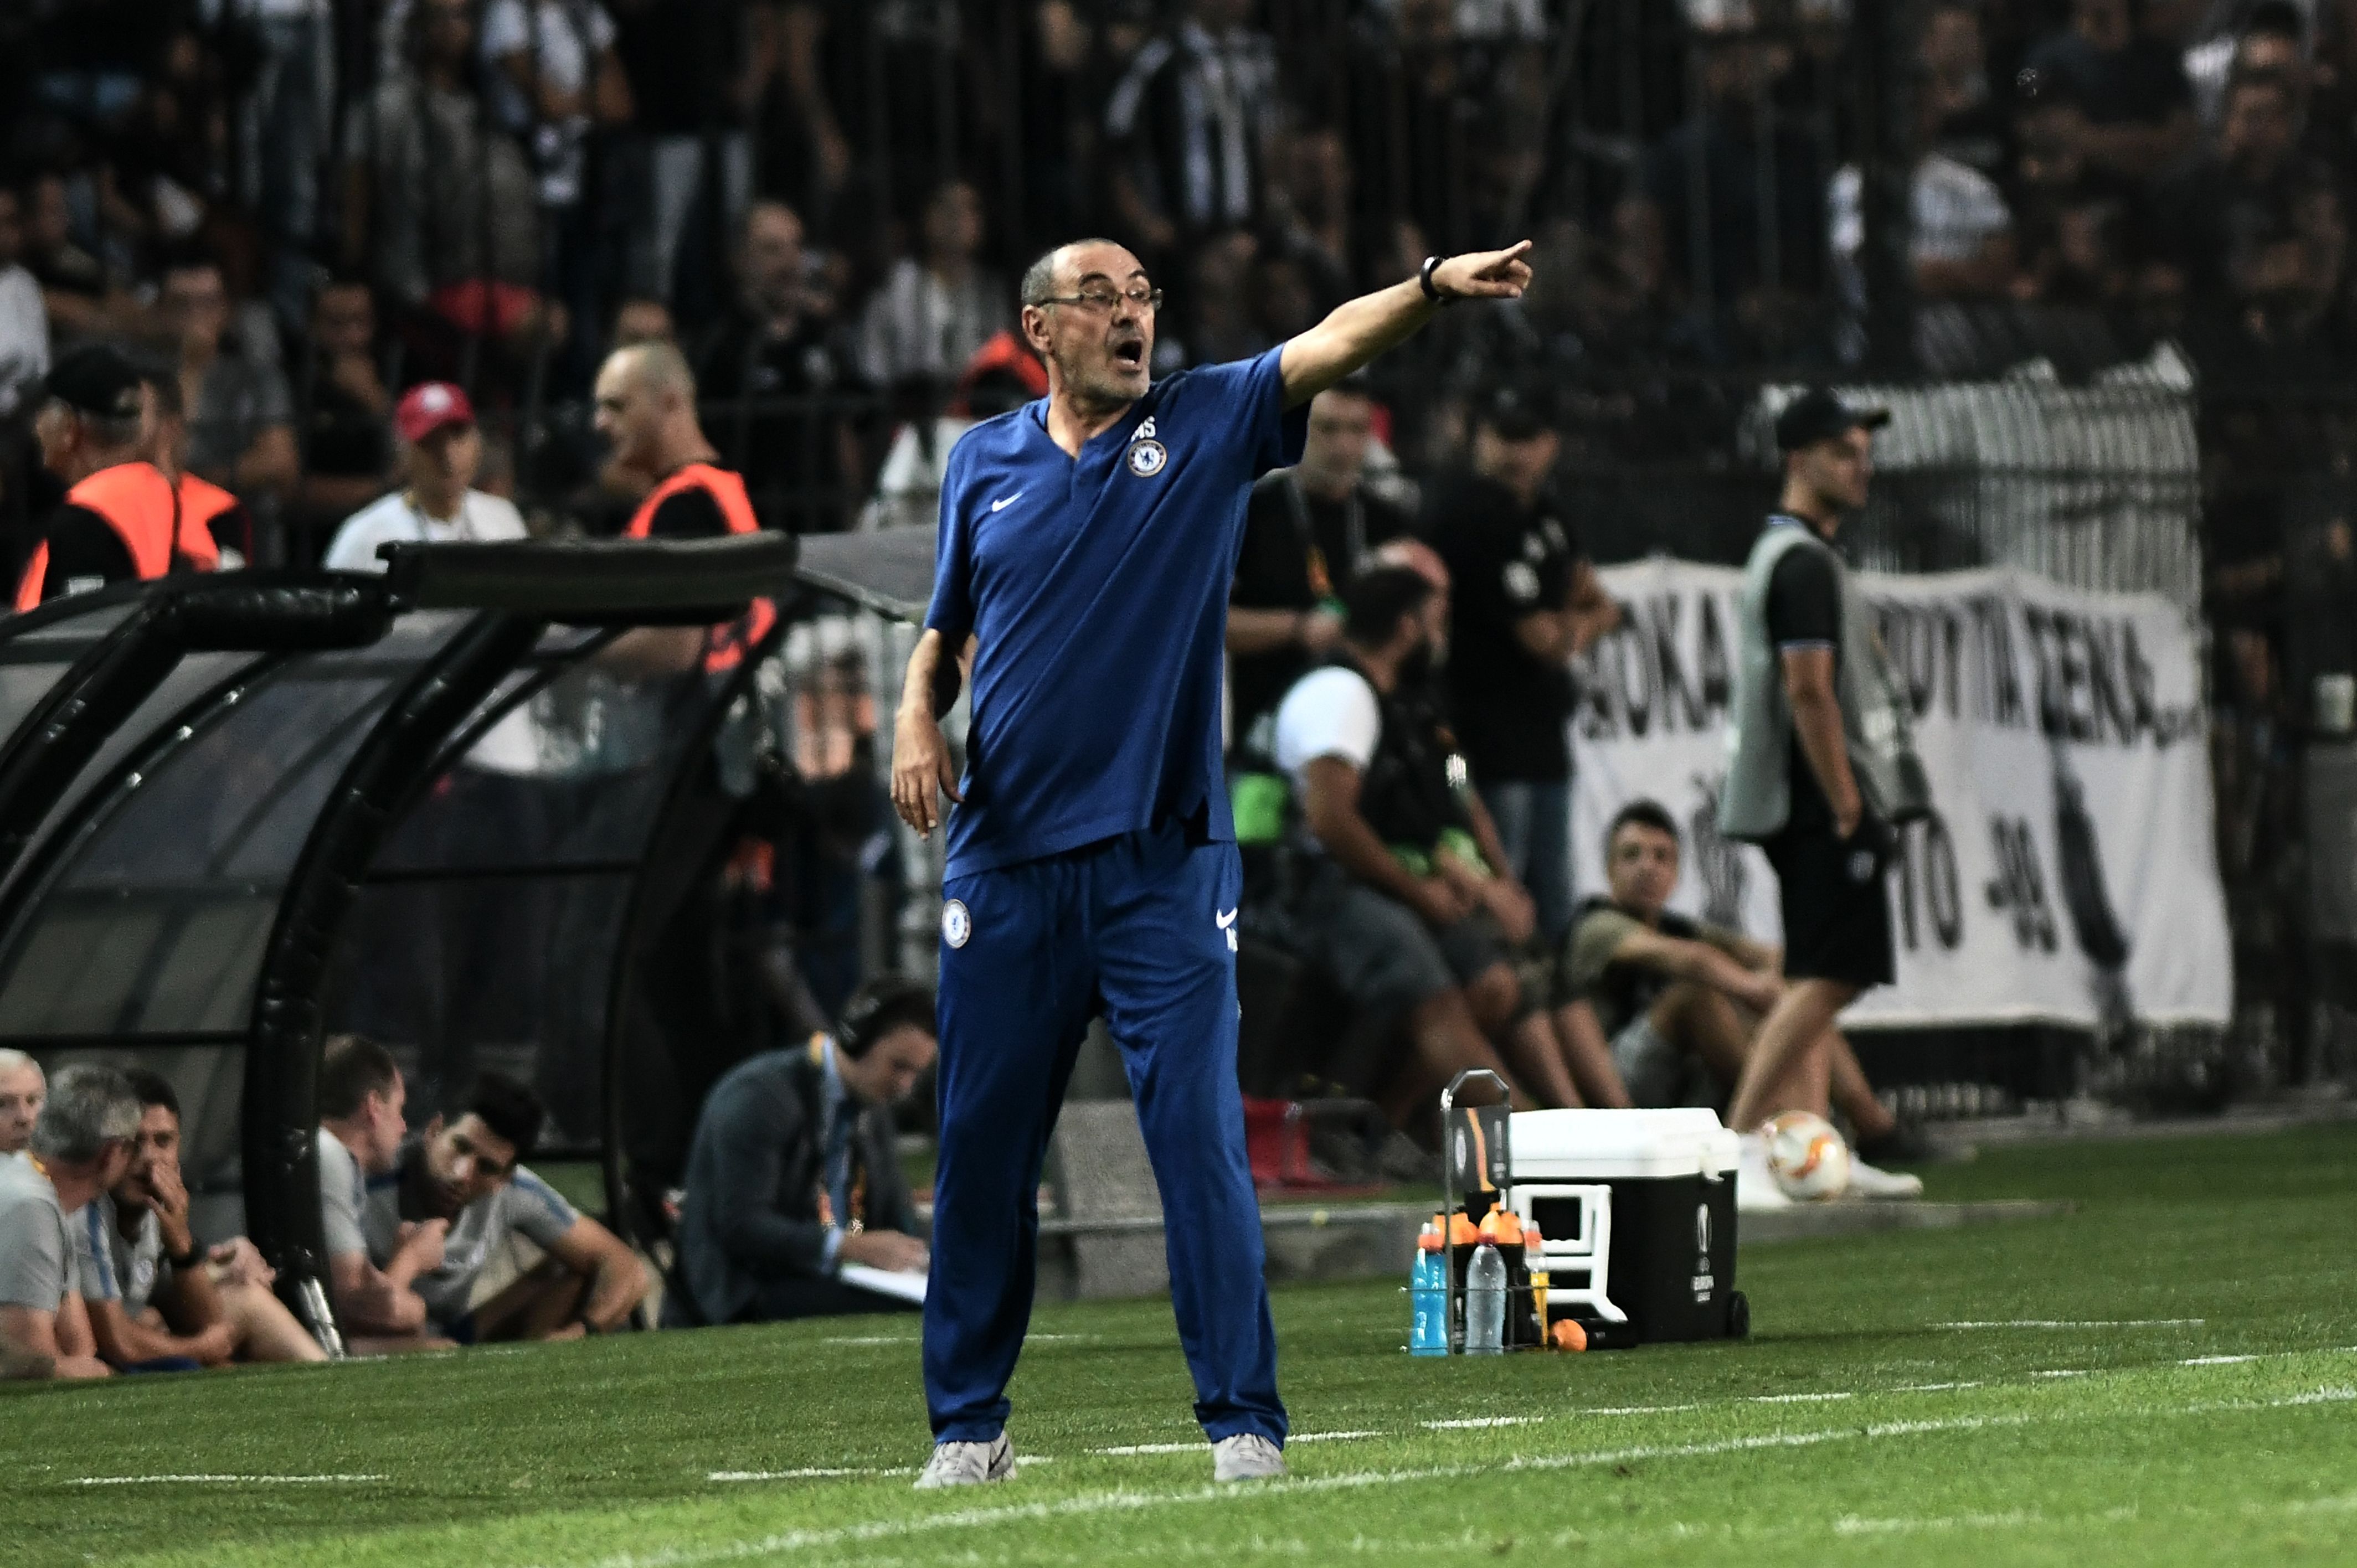 Chelsea's coach Maurizio Sarri reacts from the touchline during the UEFA Europa League Group L football match between PAOK Thessaloniki and Chelsea at Toumba stadium in Thessaloniki on September 20, 2018. (Photo by Sakis MITROLIDIS / AFP)        (Photo credit should read SAKIS MITROLIDIS/AFP/Getty Images)